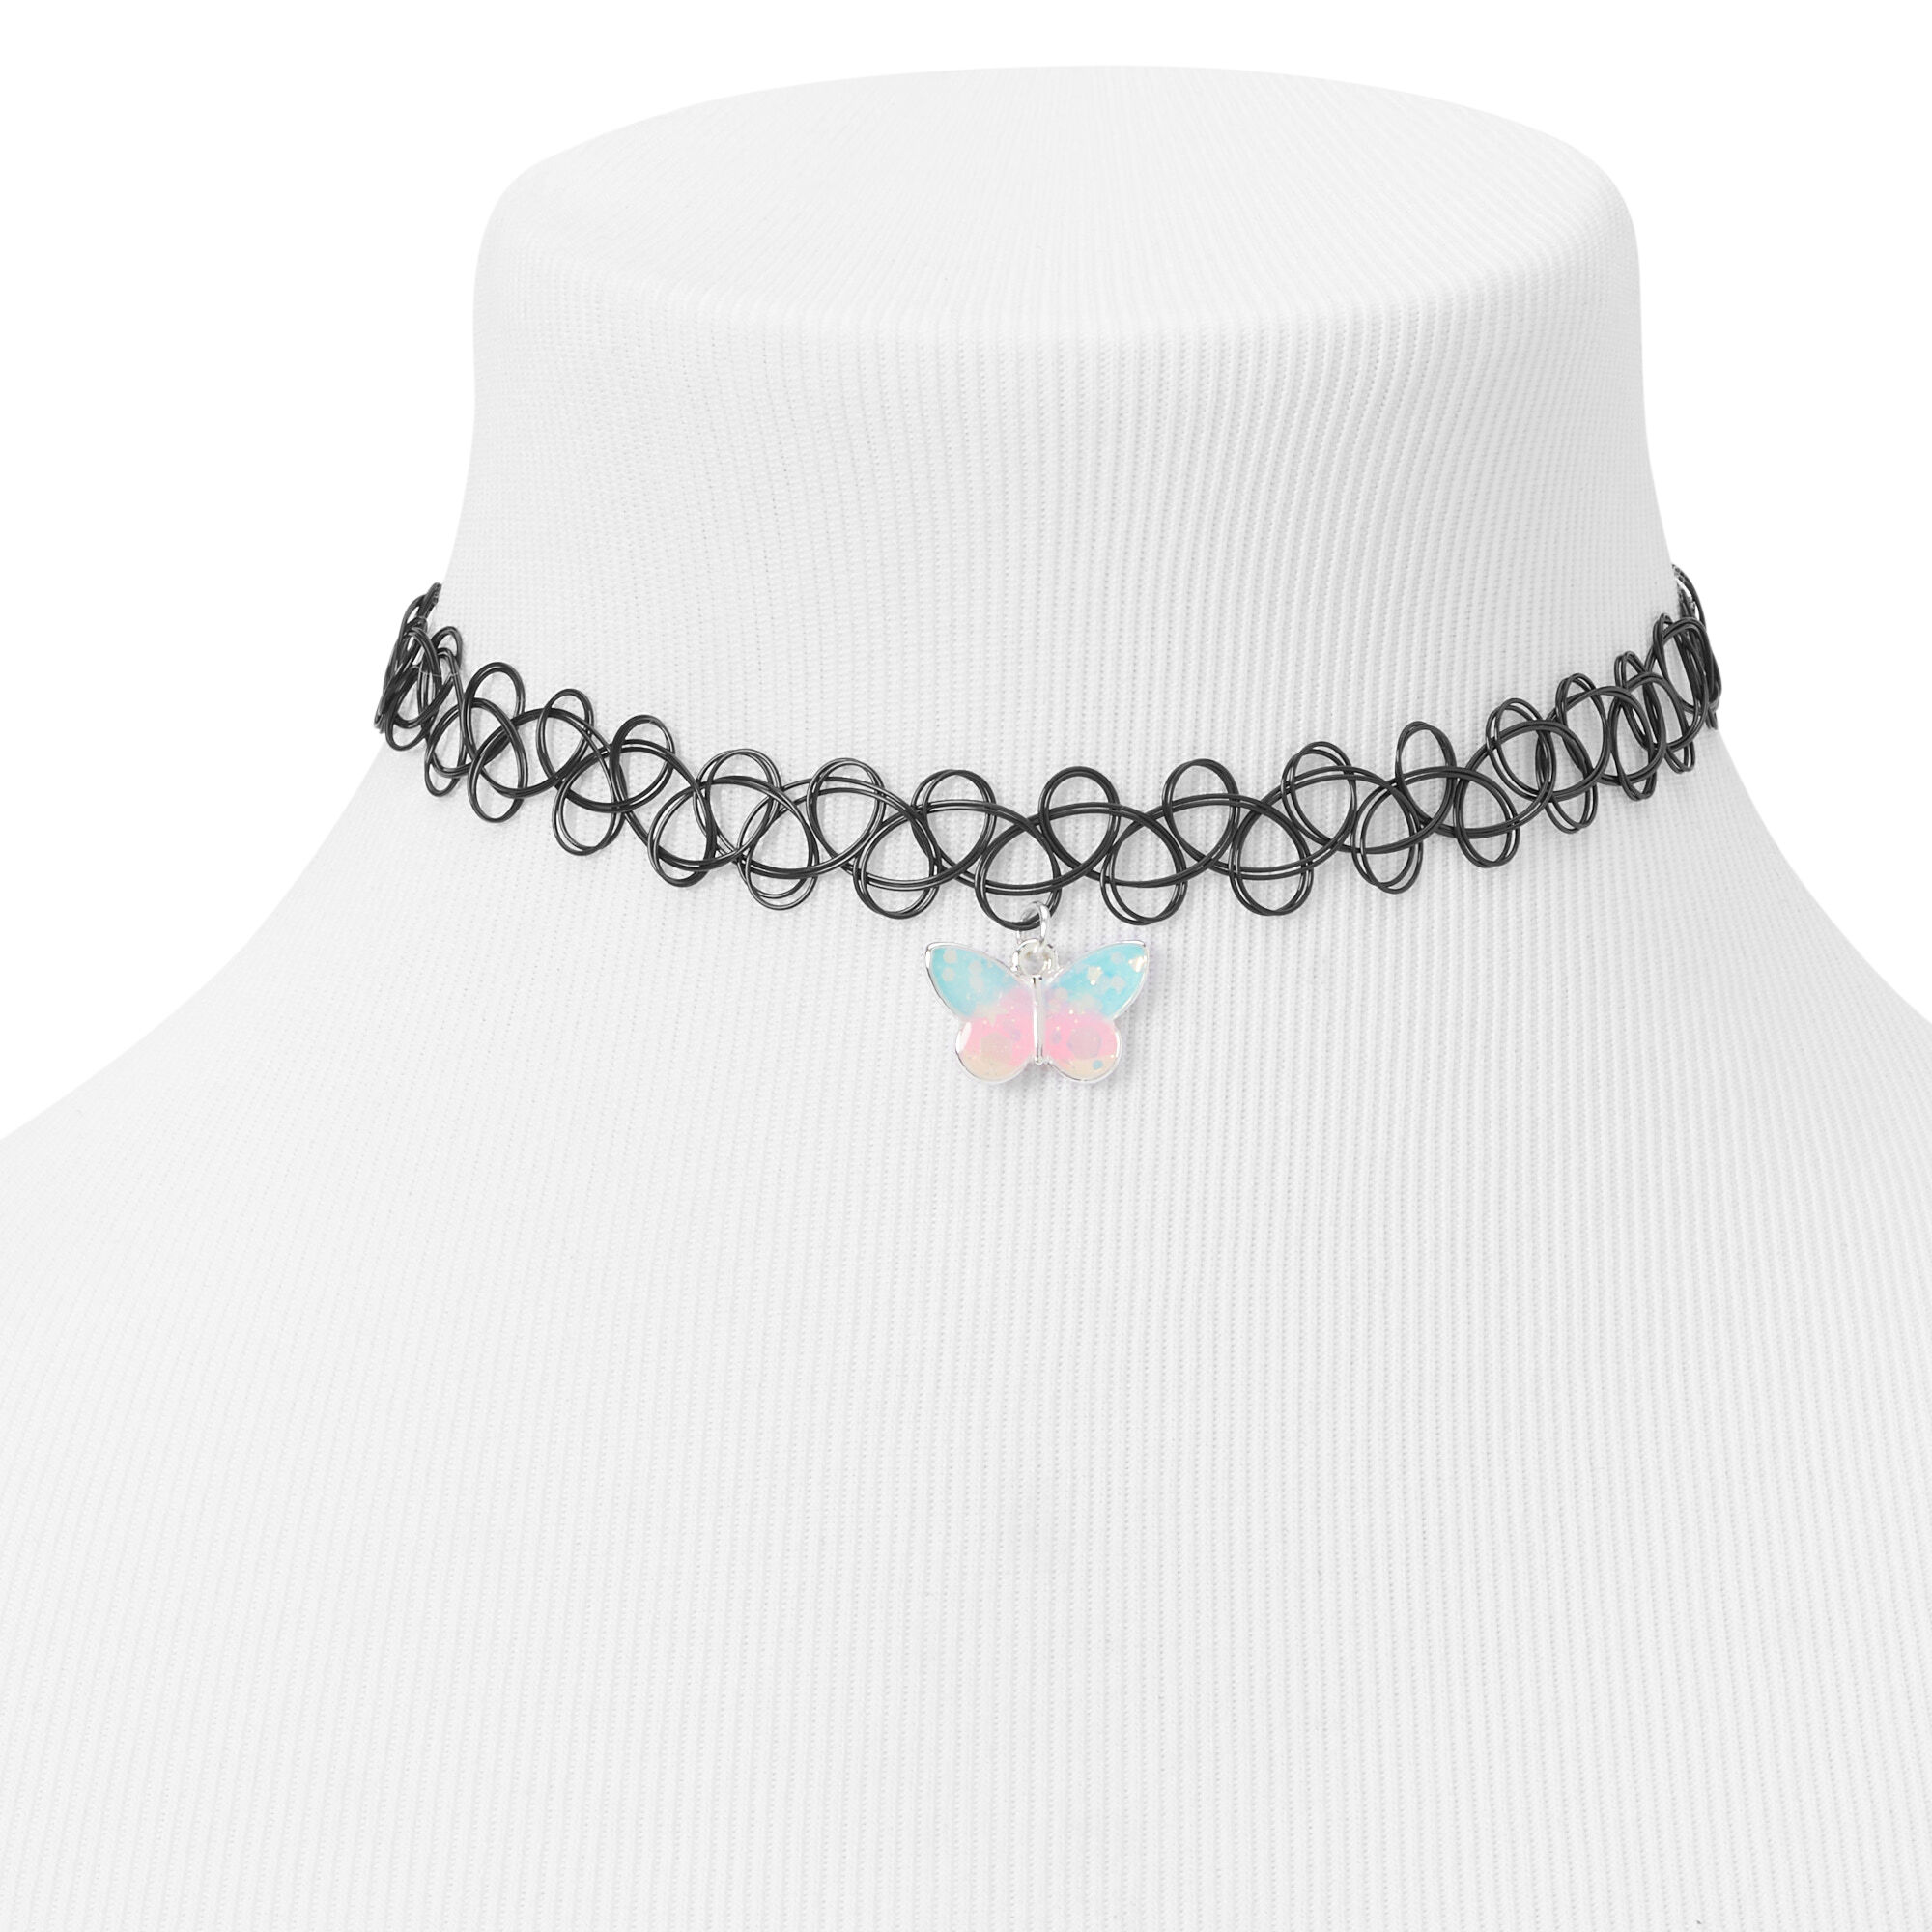 View Claires Glow In The Dark Pastel Butterfly Tattoo Choker Necklace Black information